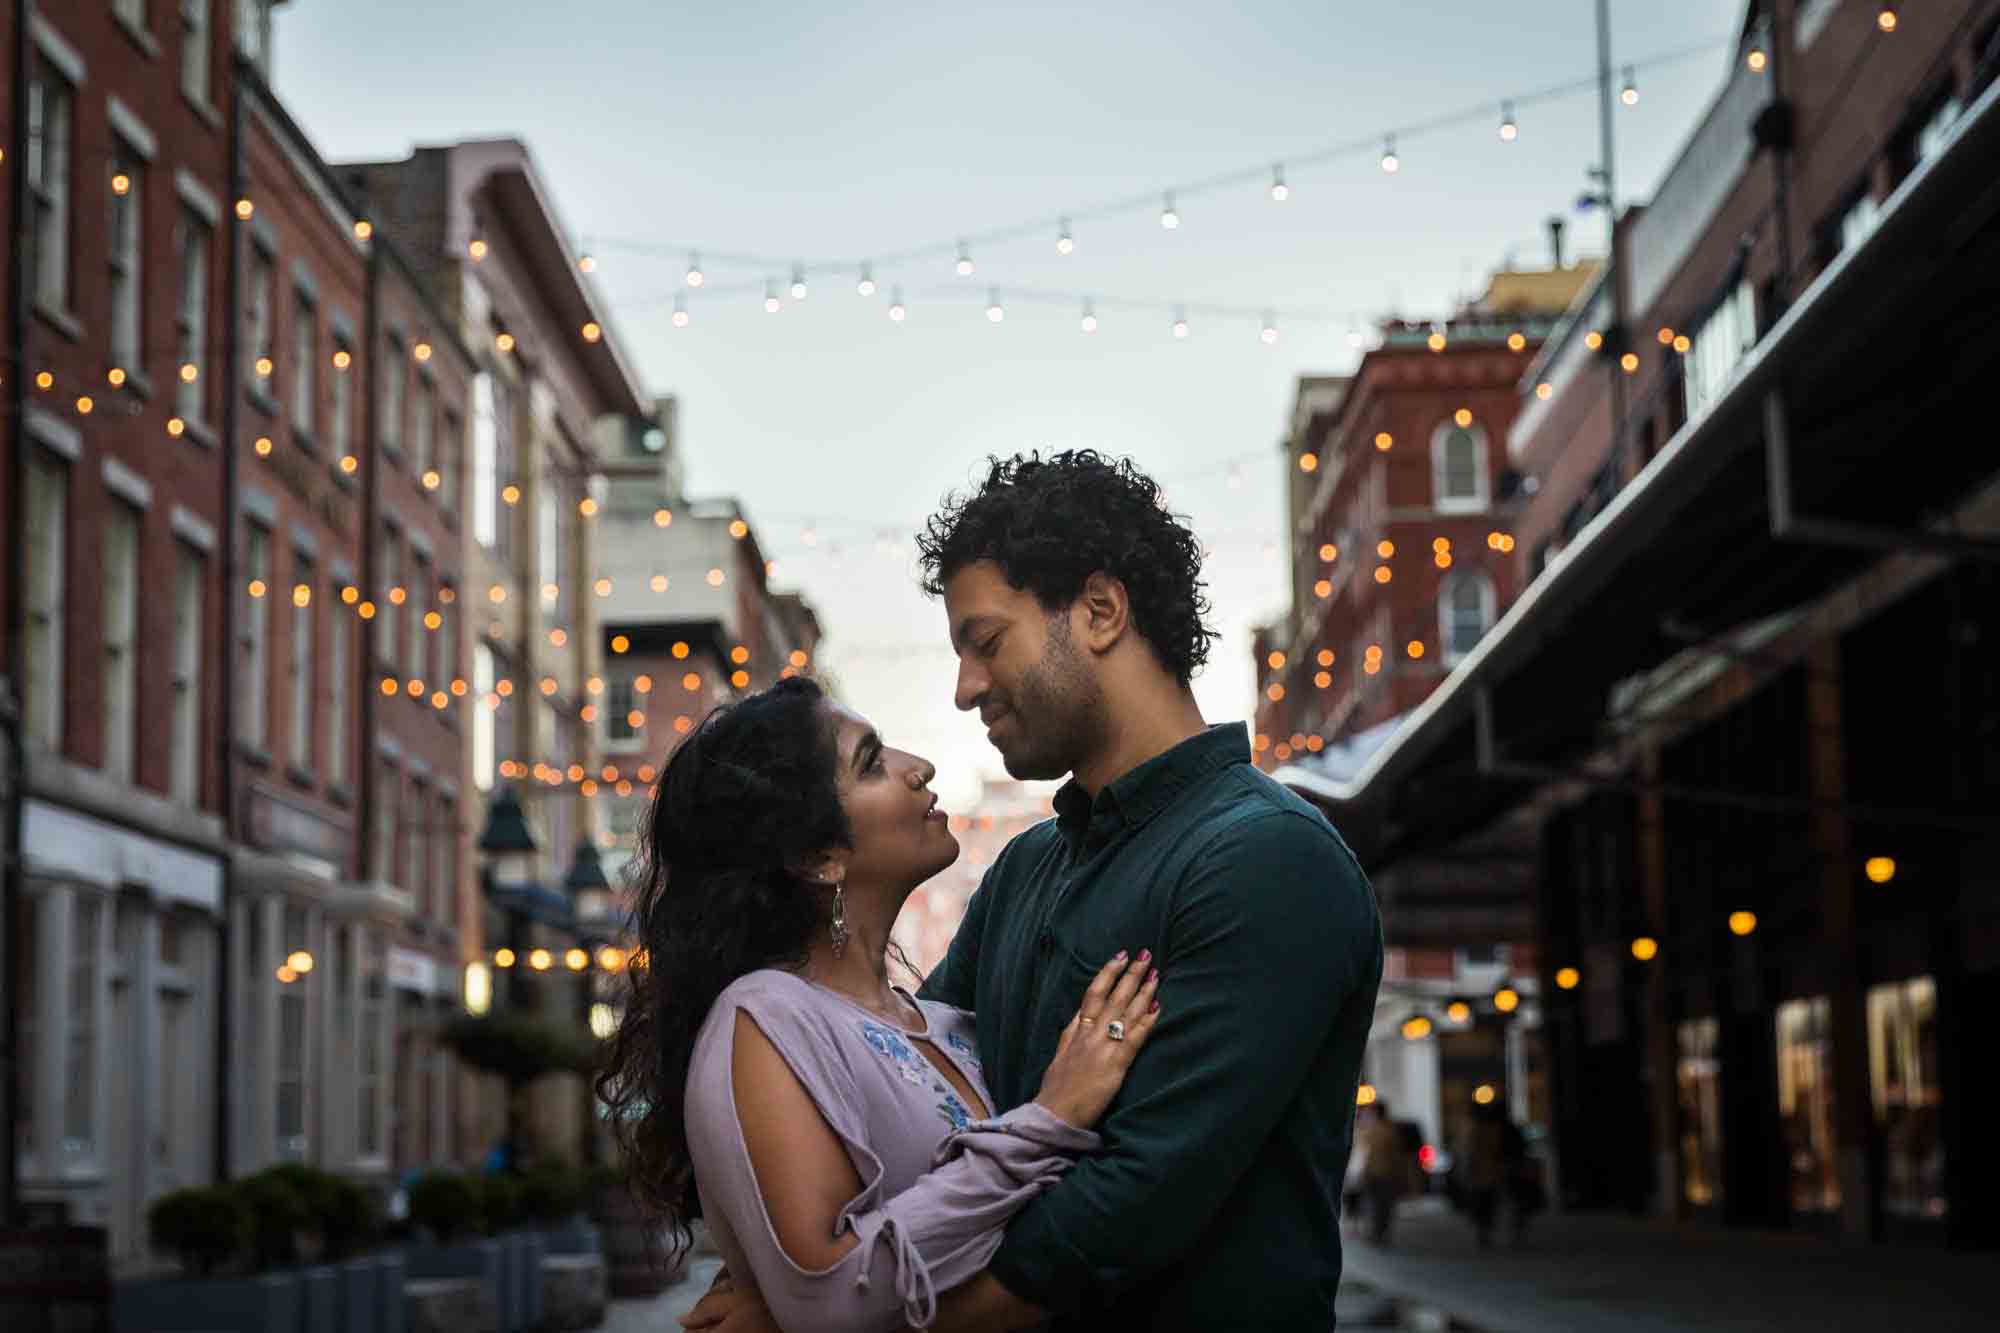 Couple hugging under fair lights at dusk in South Street Seaport